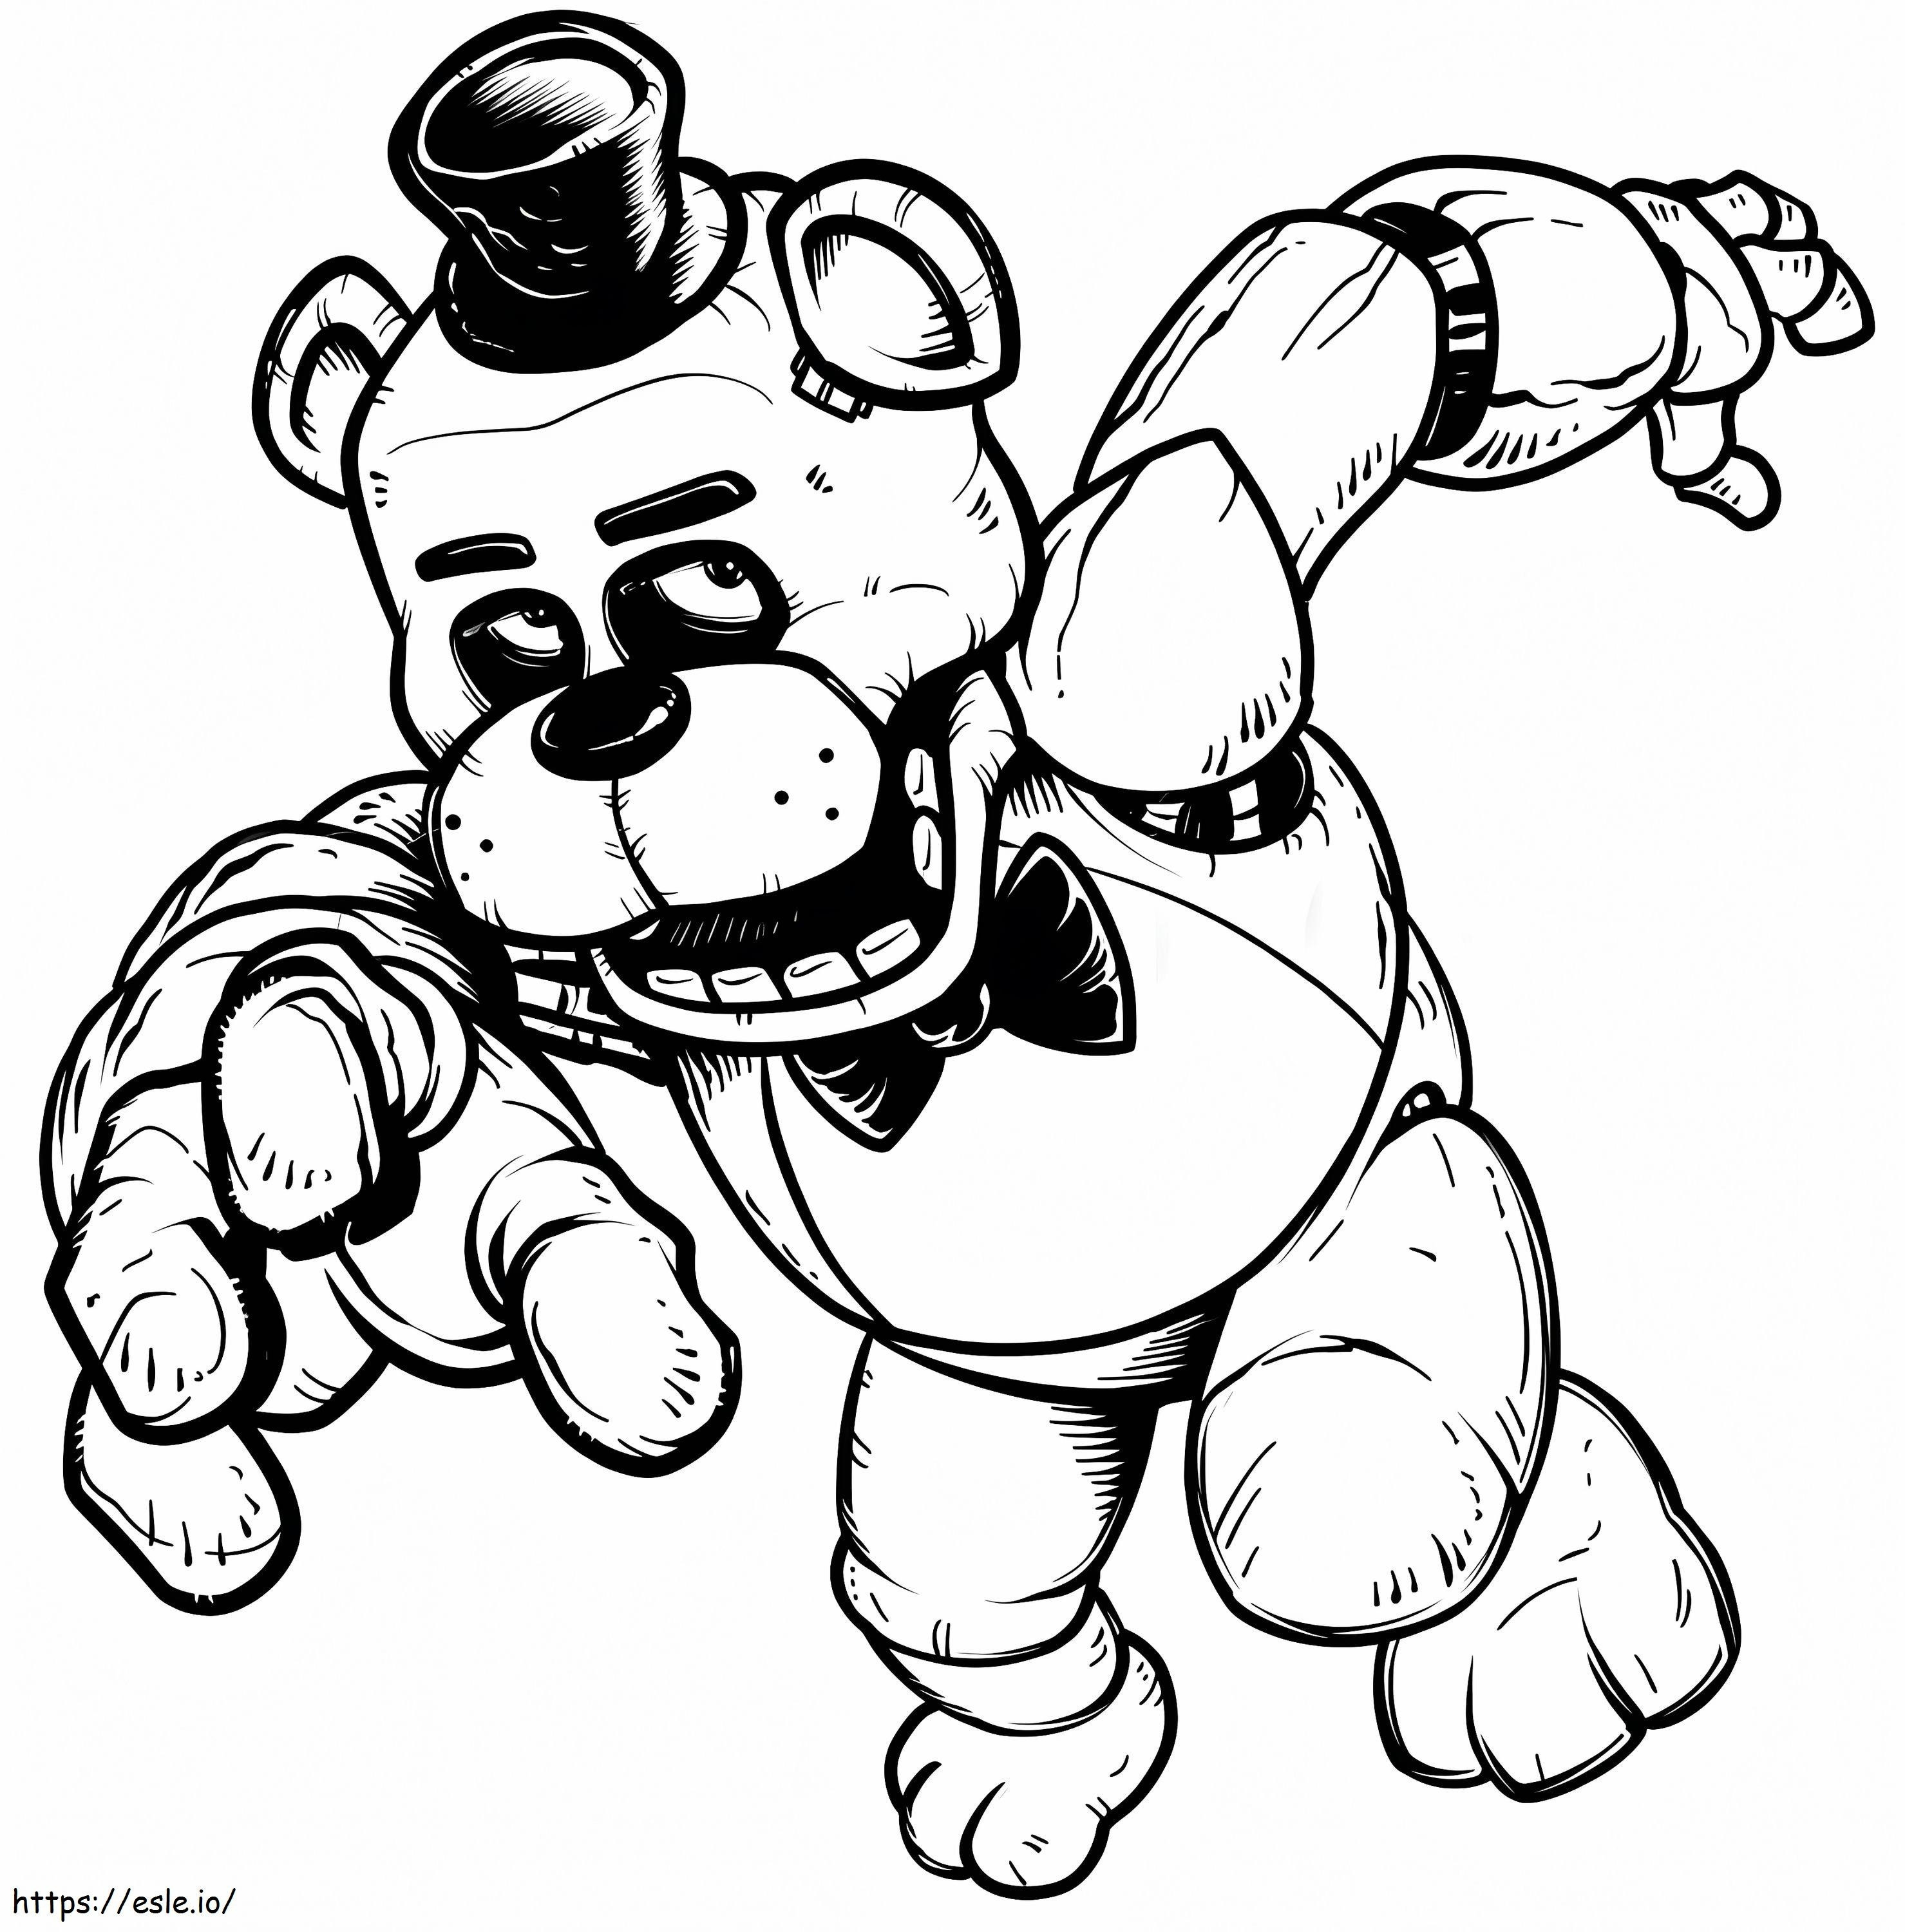 Scary FNAF Freddy coloring page